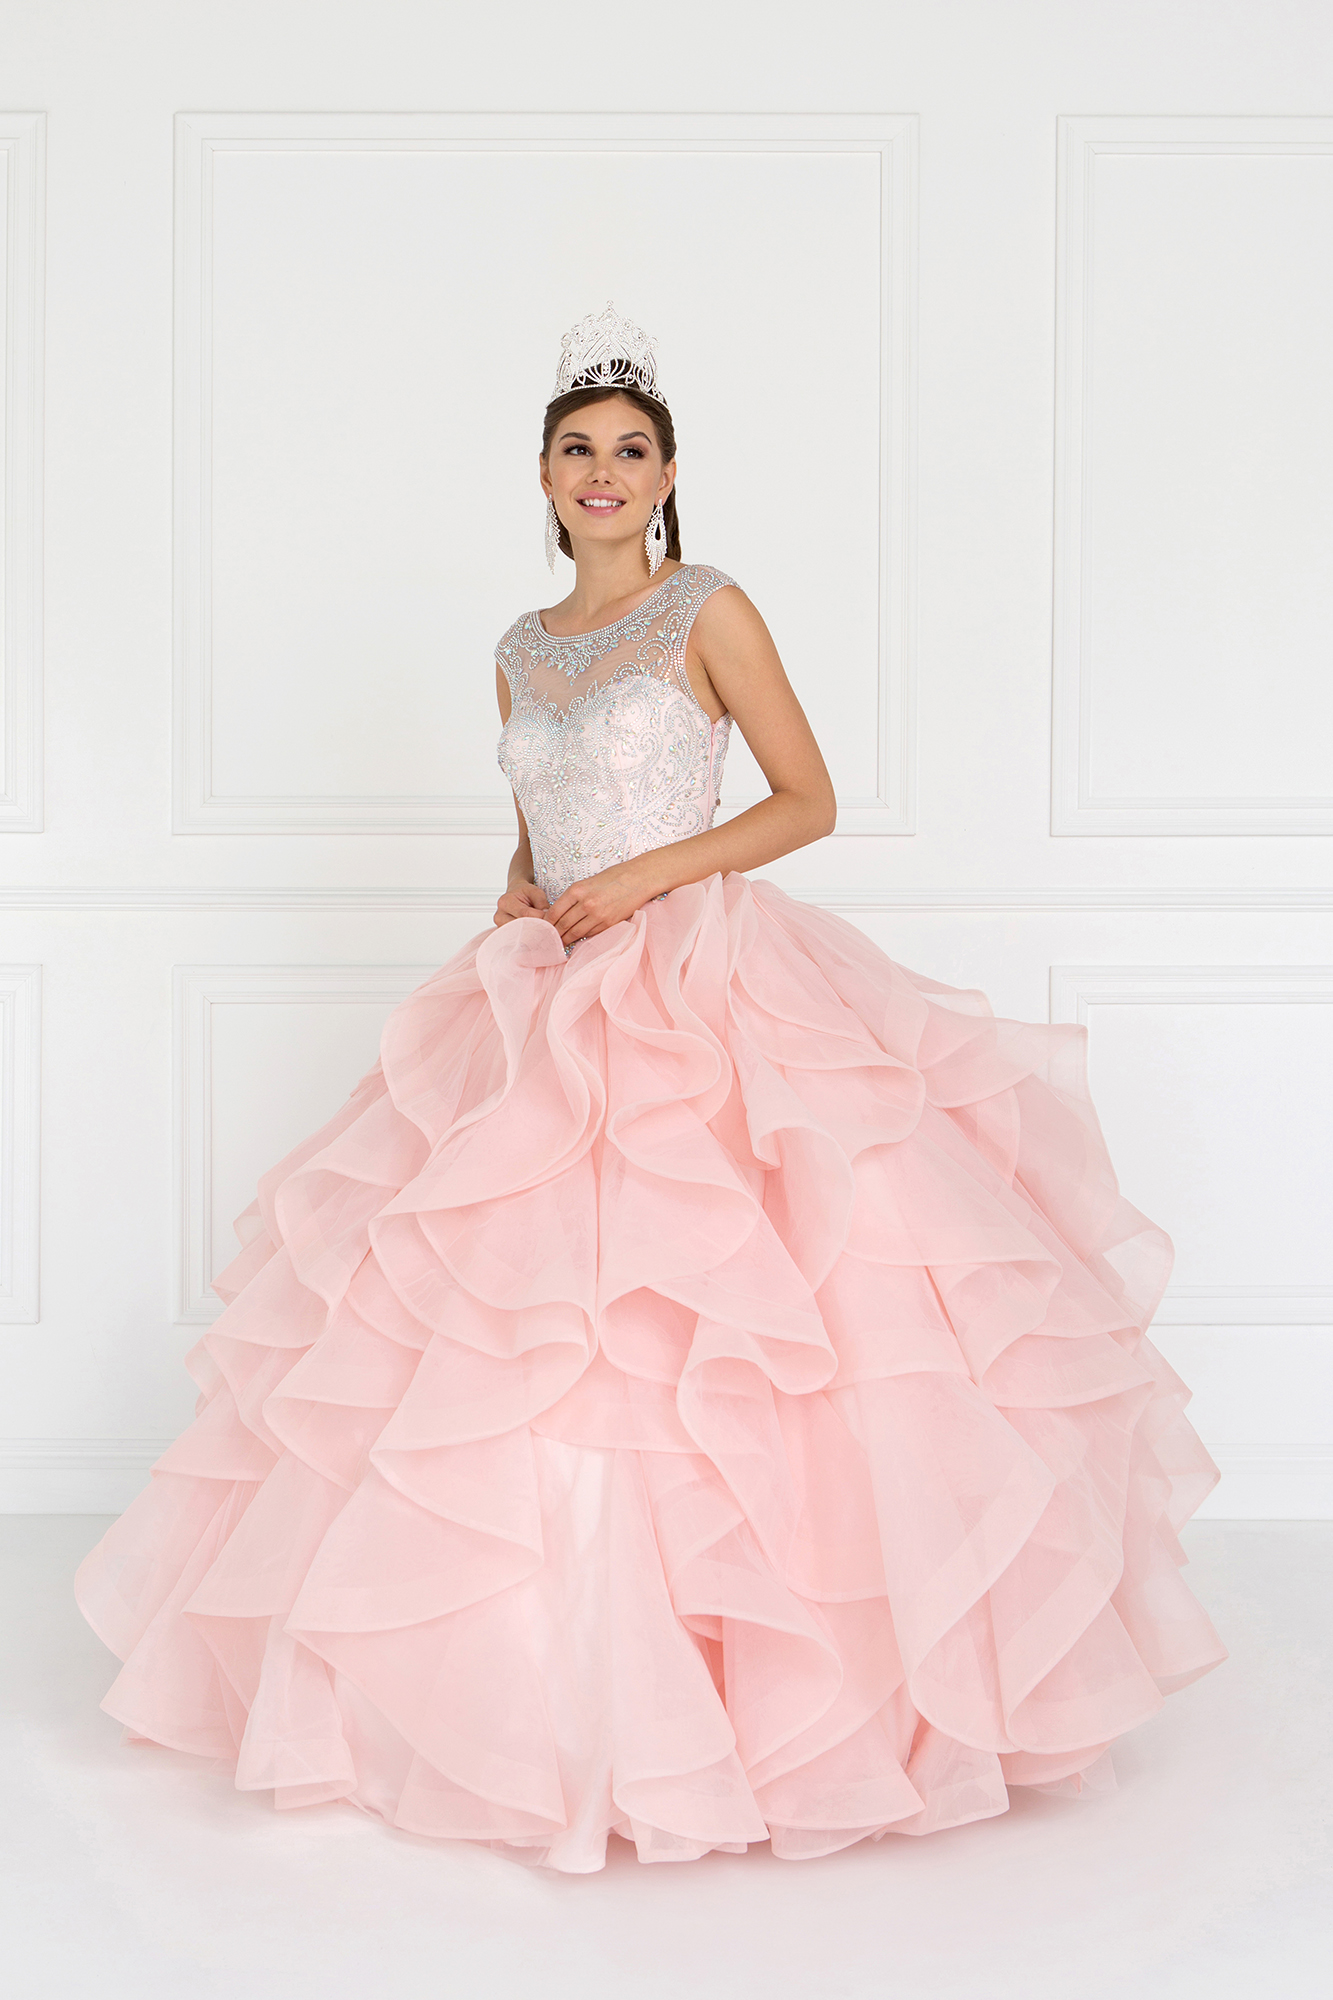 woman in silver and pink ruffled ballgown